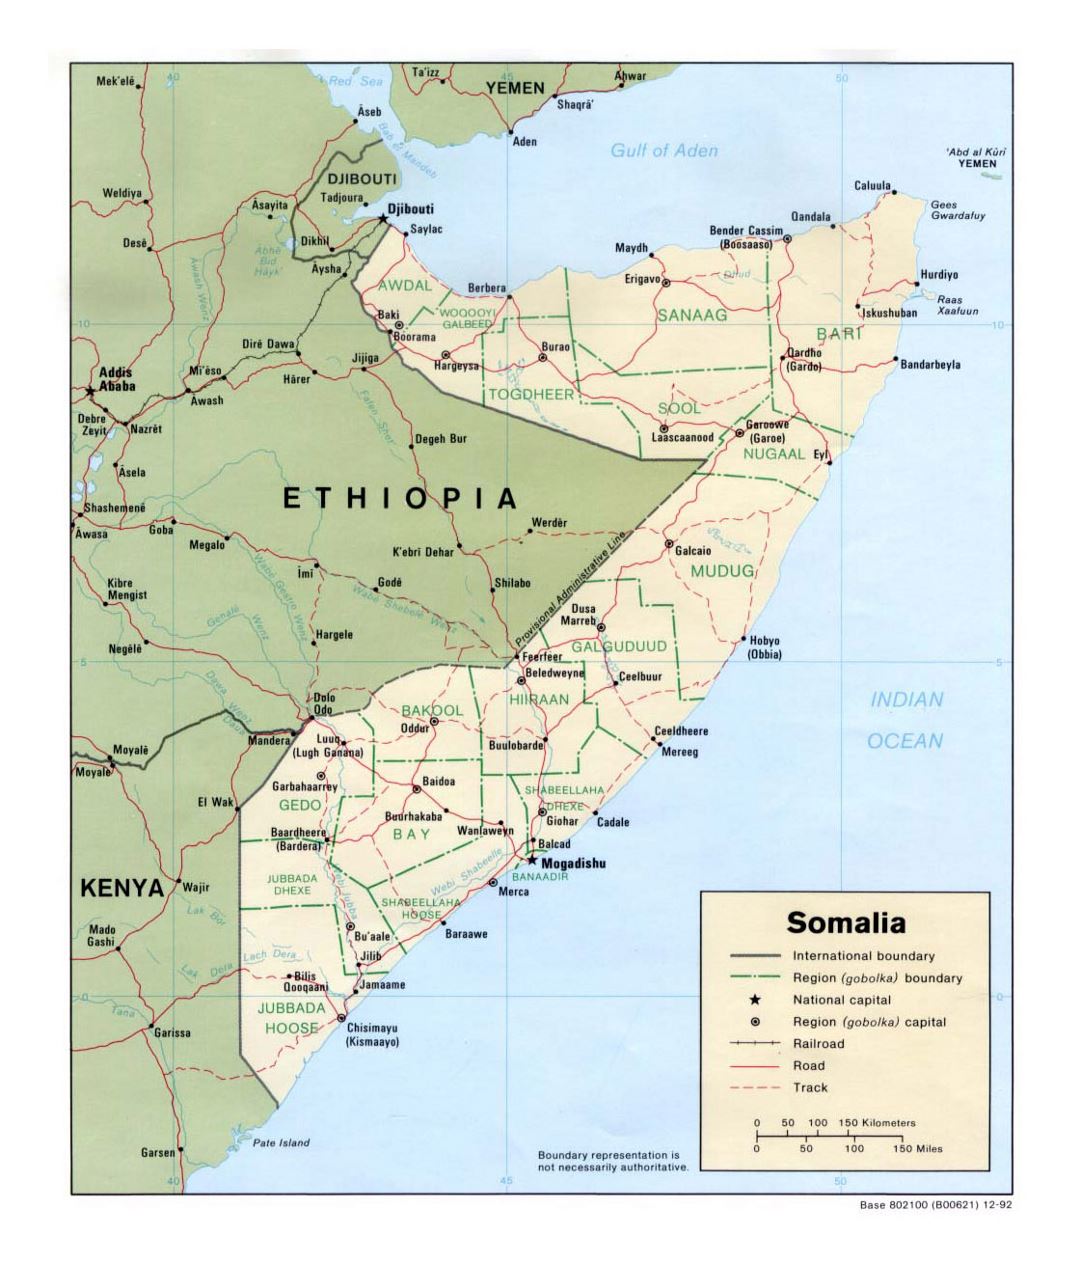 Detailed political and administrative map of Somalia with roads, railroads and major cities - 1992